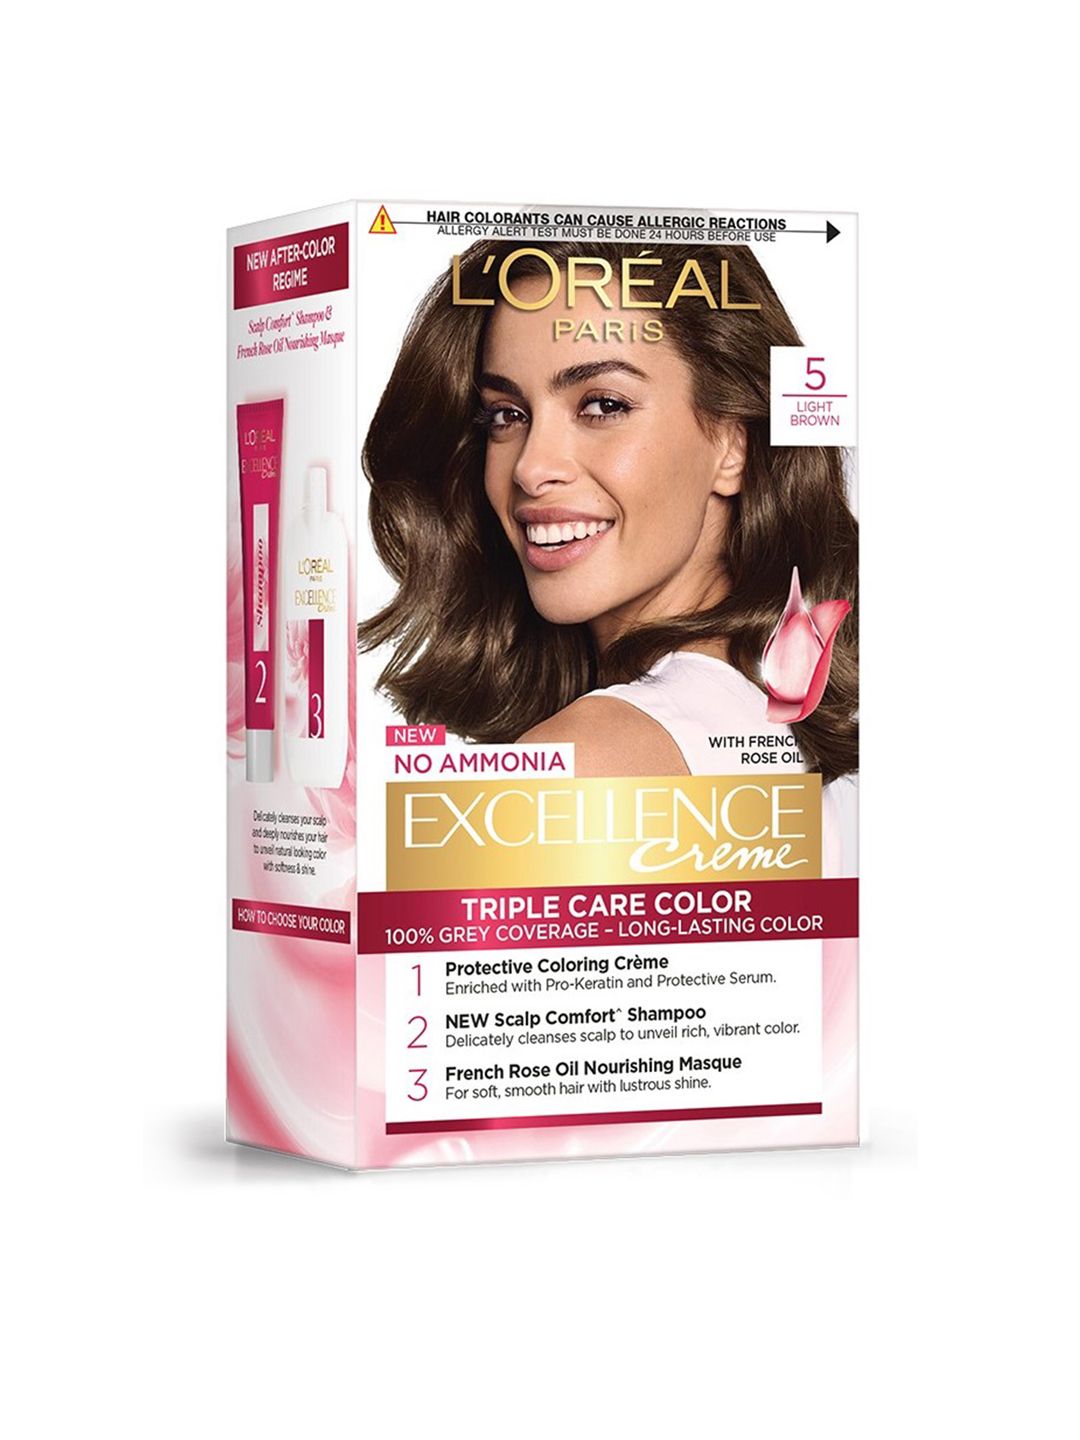 LOreal Paris Excellence Creme Hair Colour - Natural Brown 5 72ml+100g Price in India